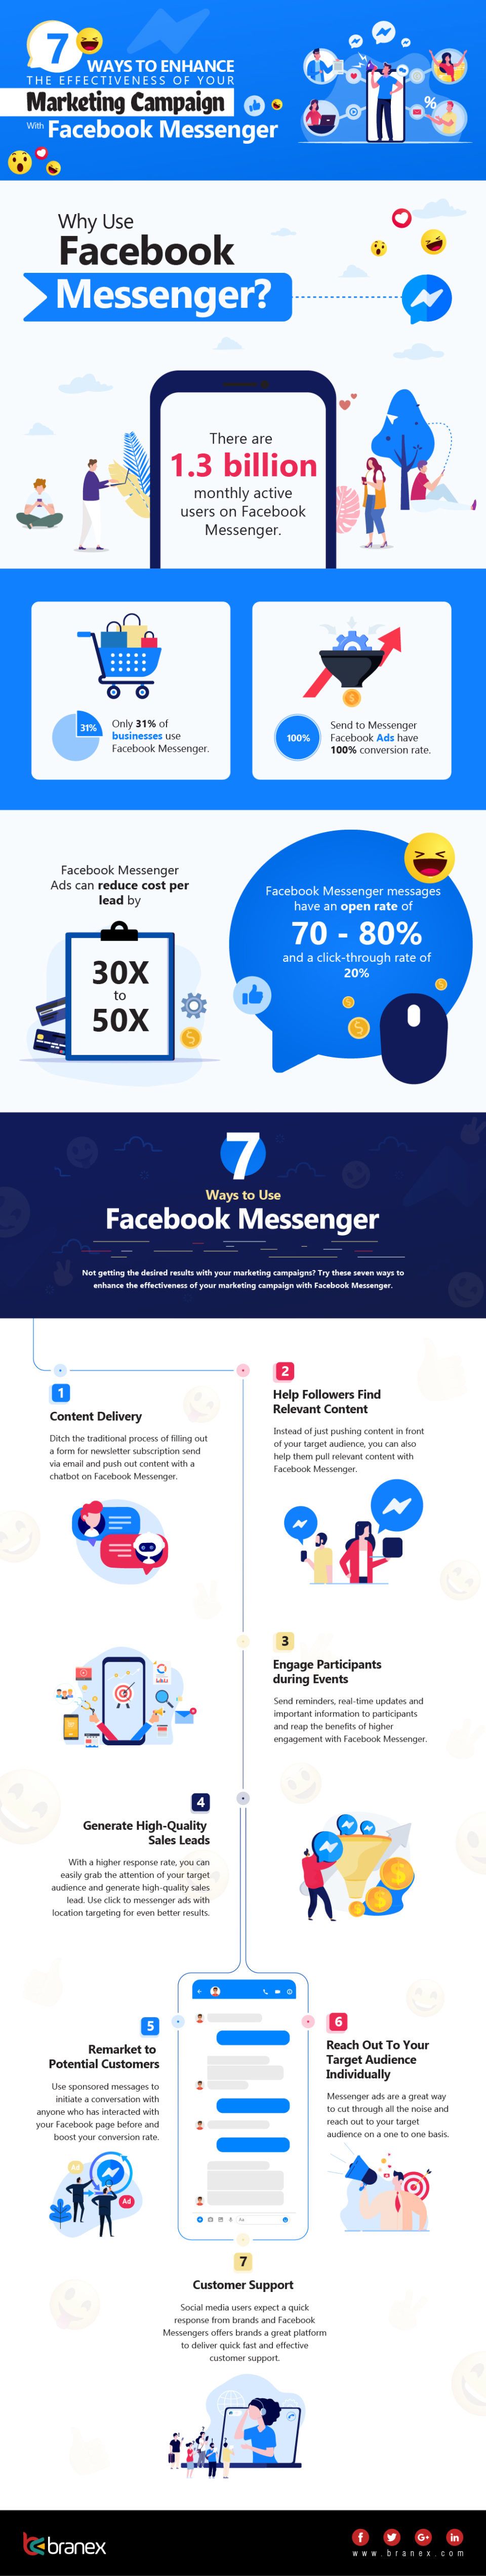 7 Ways To Enhance The Effectiveness Of Your Marketing Campaign With Facebook Messenger